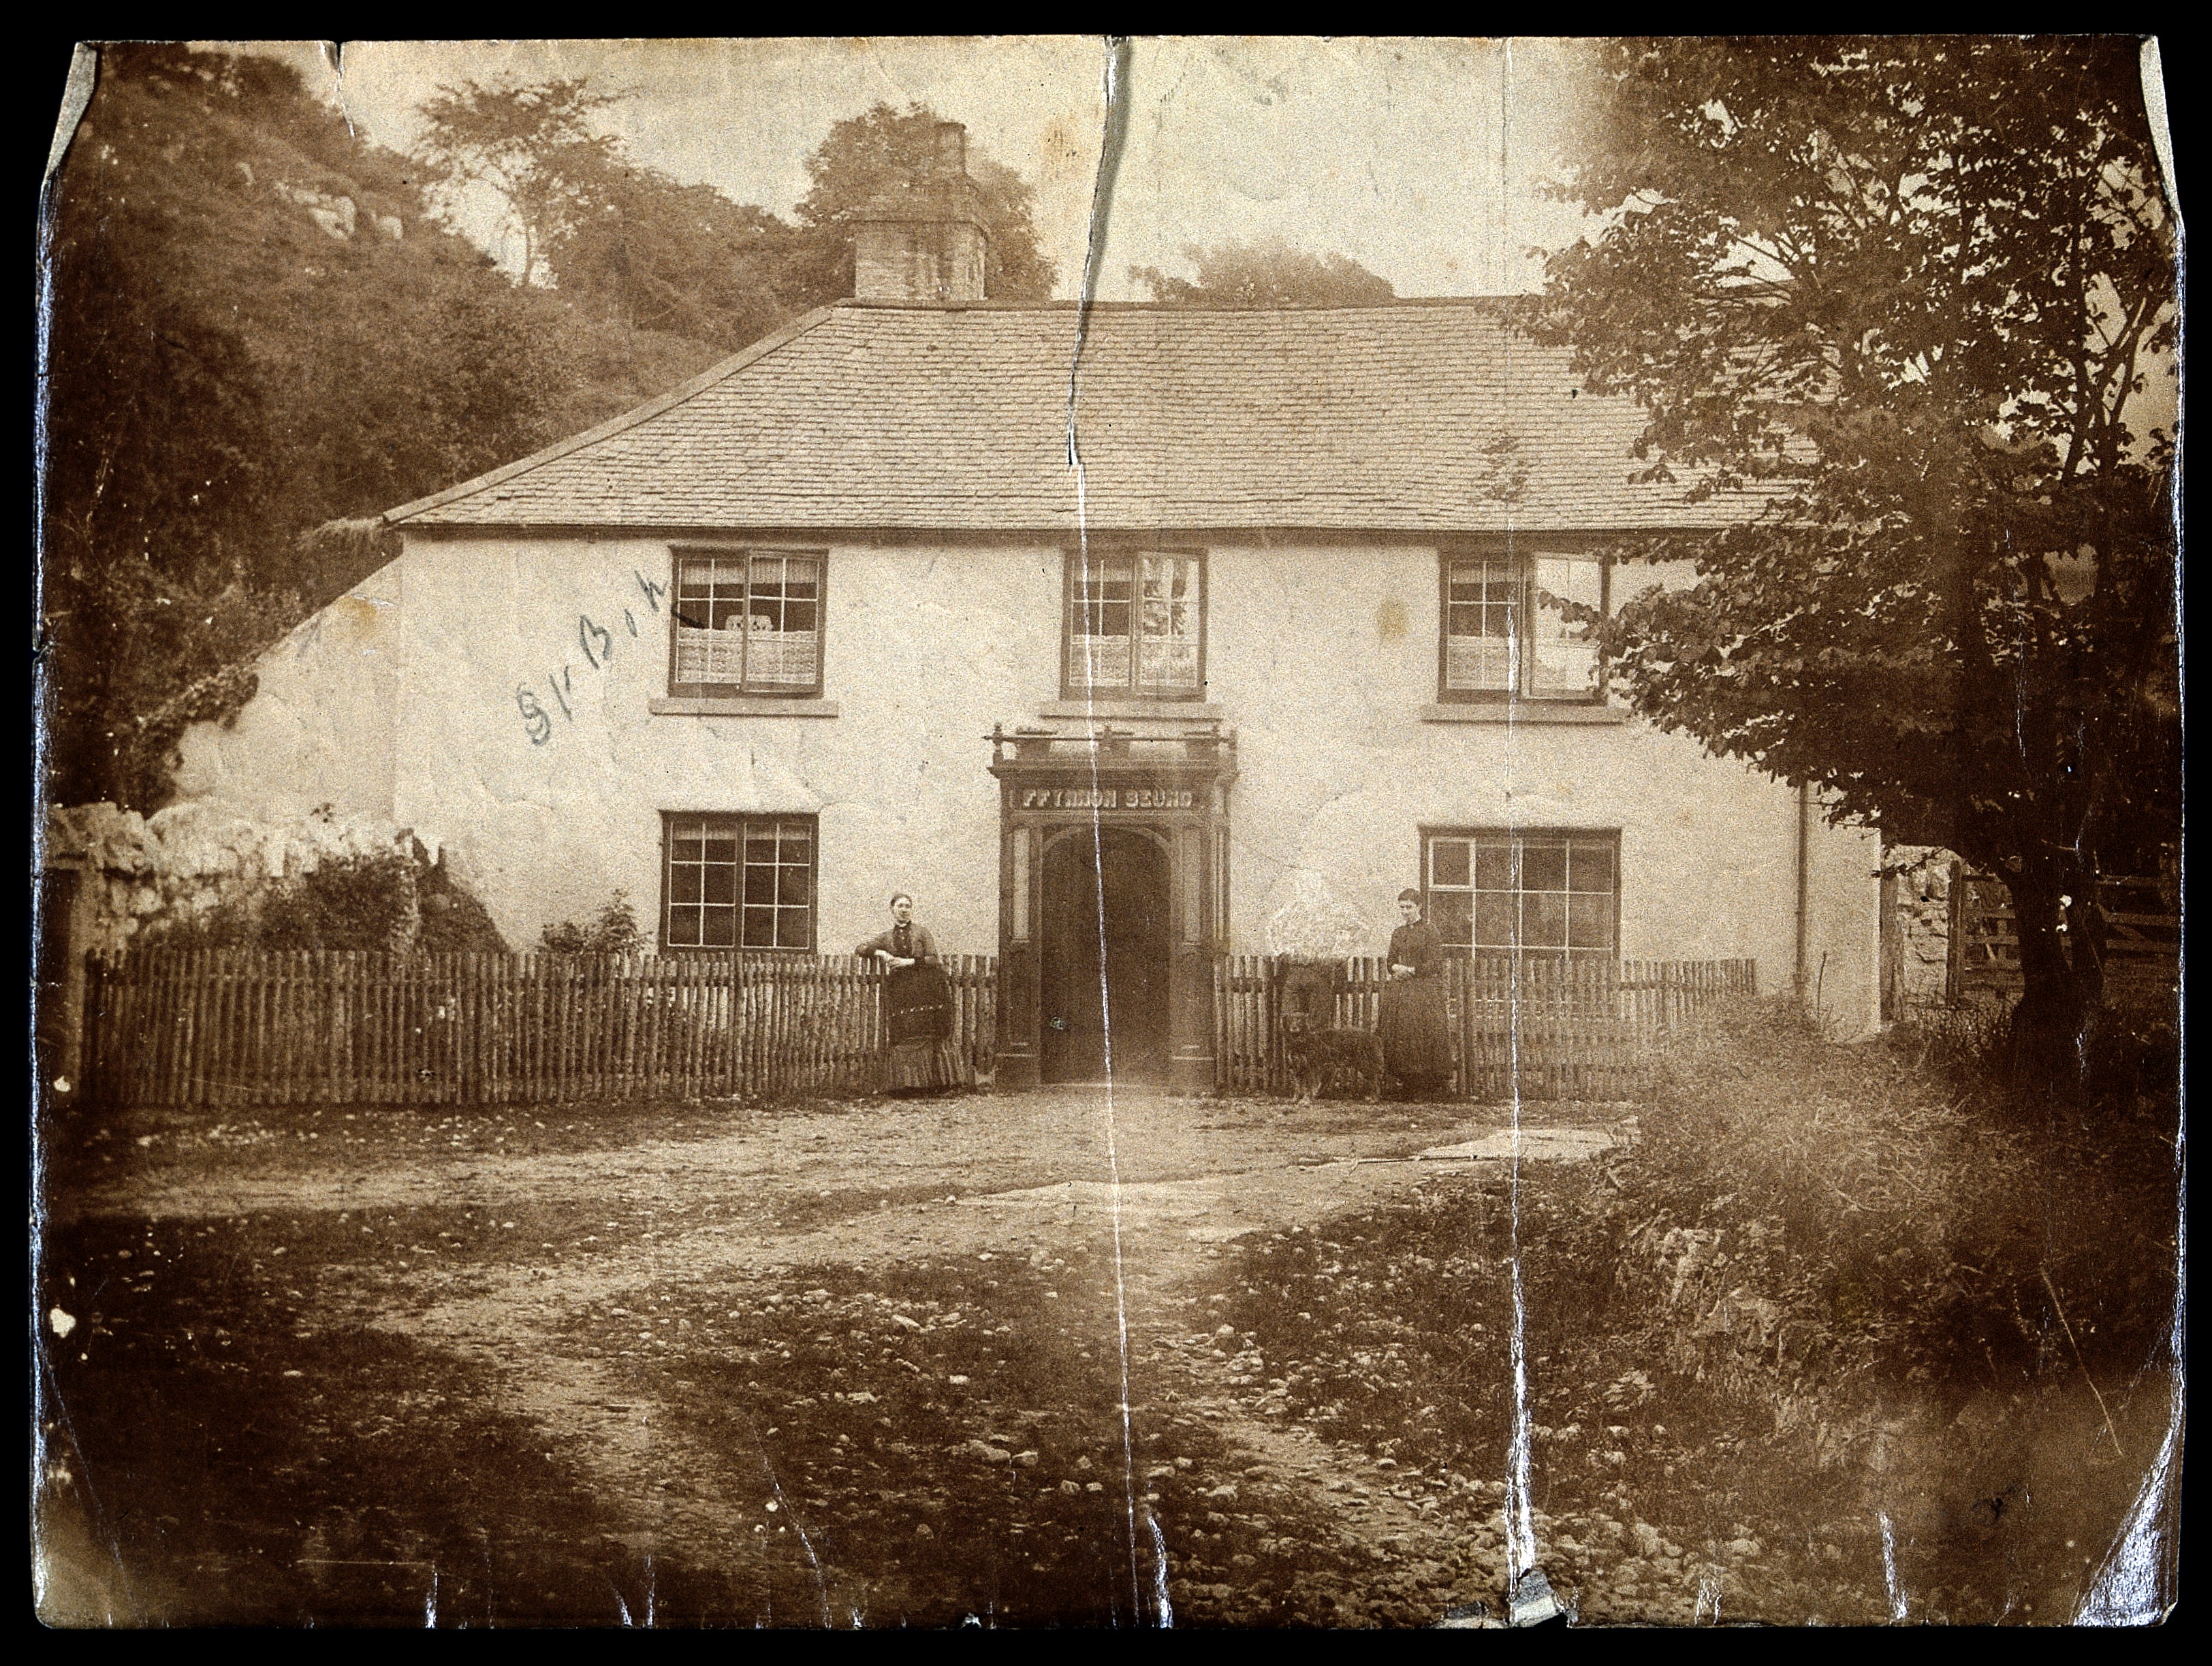 Henry Morton Stanley's birthplace at St Asaph, Wales. Photog Wellcome V0027213